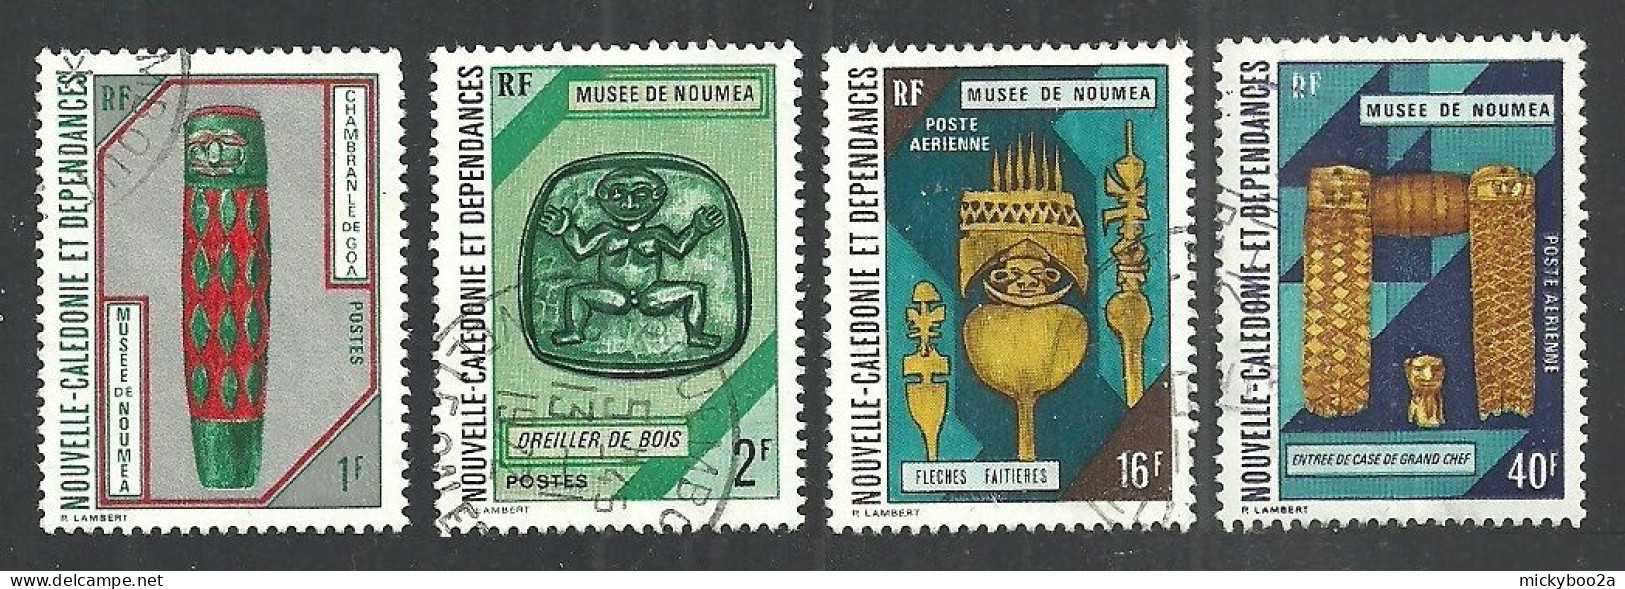 NEW CALEDONIA 1972 NOUMEA MUSEUM EXHIBITS VALUES USED - Used Stamps